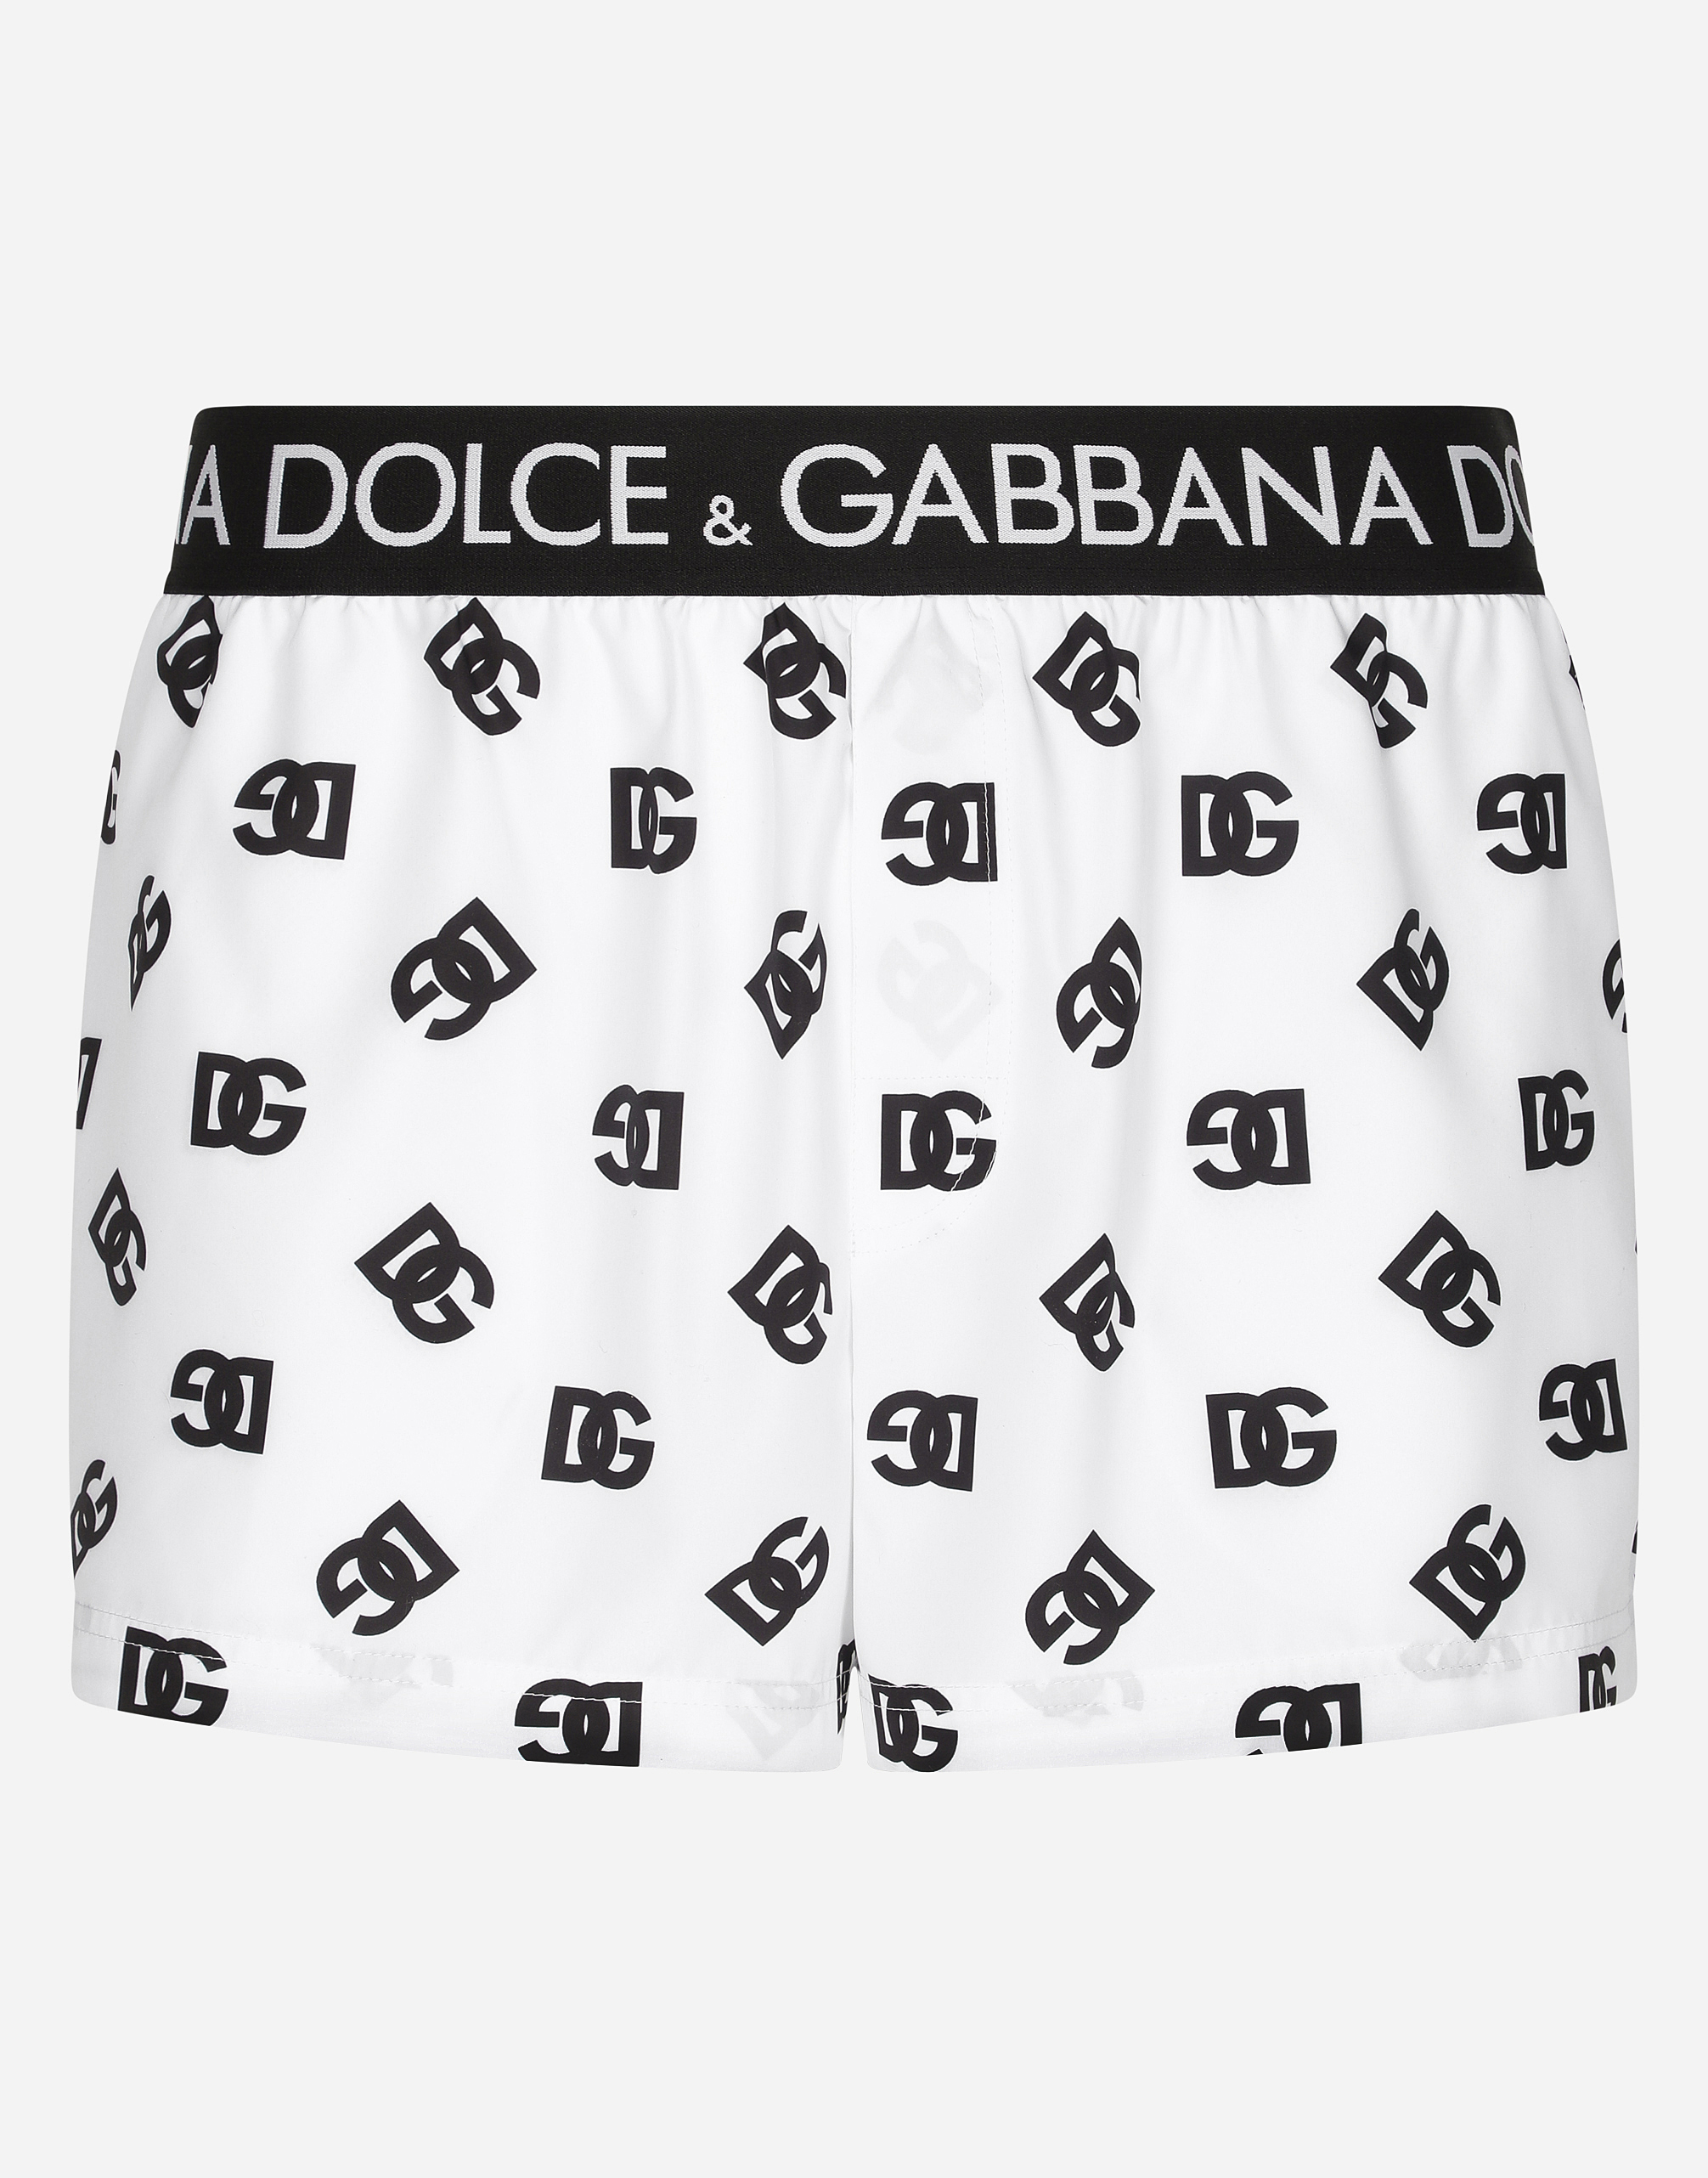 Short swim trunks with all-over DG print in Multicolor